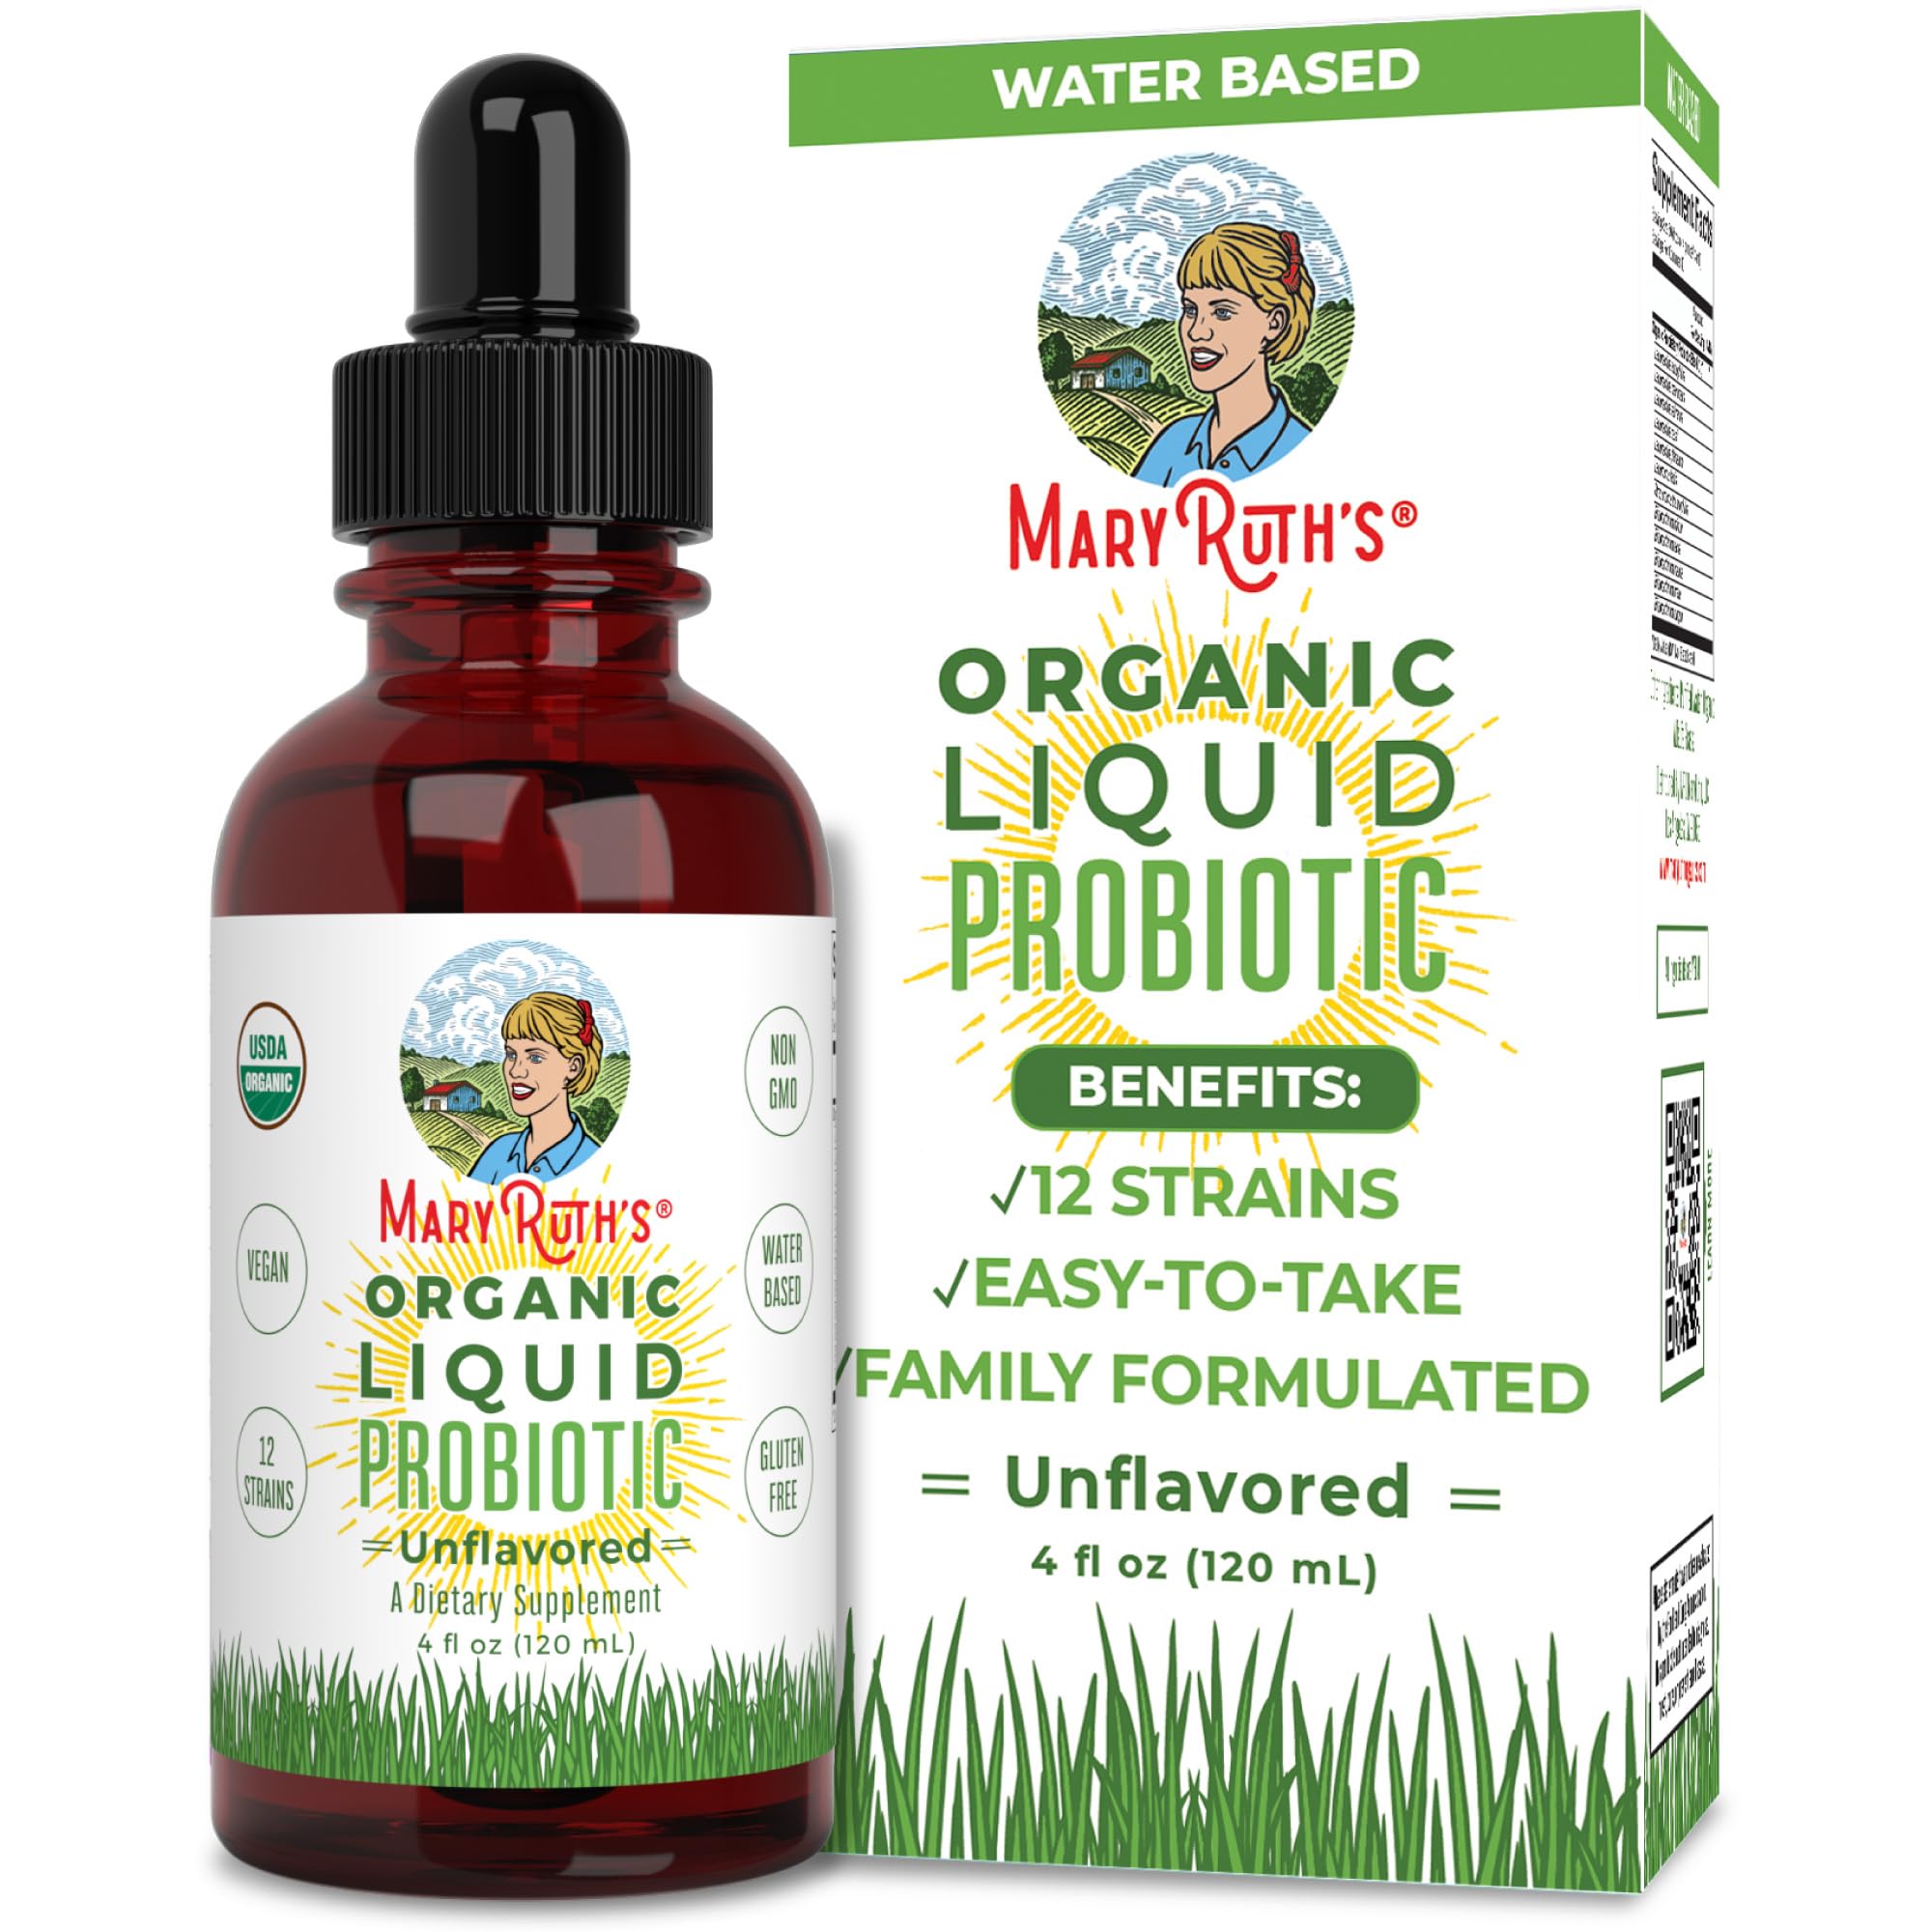 MaryRuth's Chlorophyll Liquid Drops + Liquid Probiotic Supplement 2-Pack Bundle | Energy Boost, Immune Support, Detox and Cleanse, Gut Health | Vegan, Non-GMO